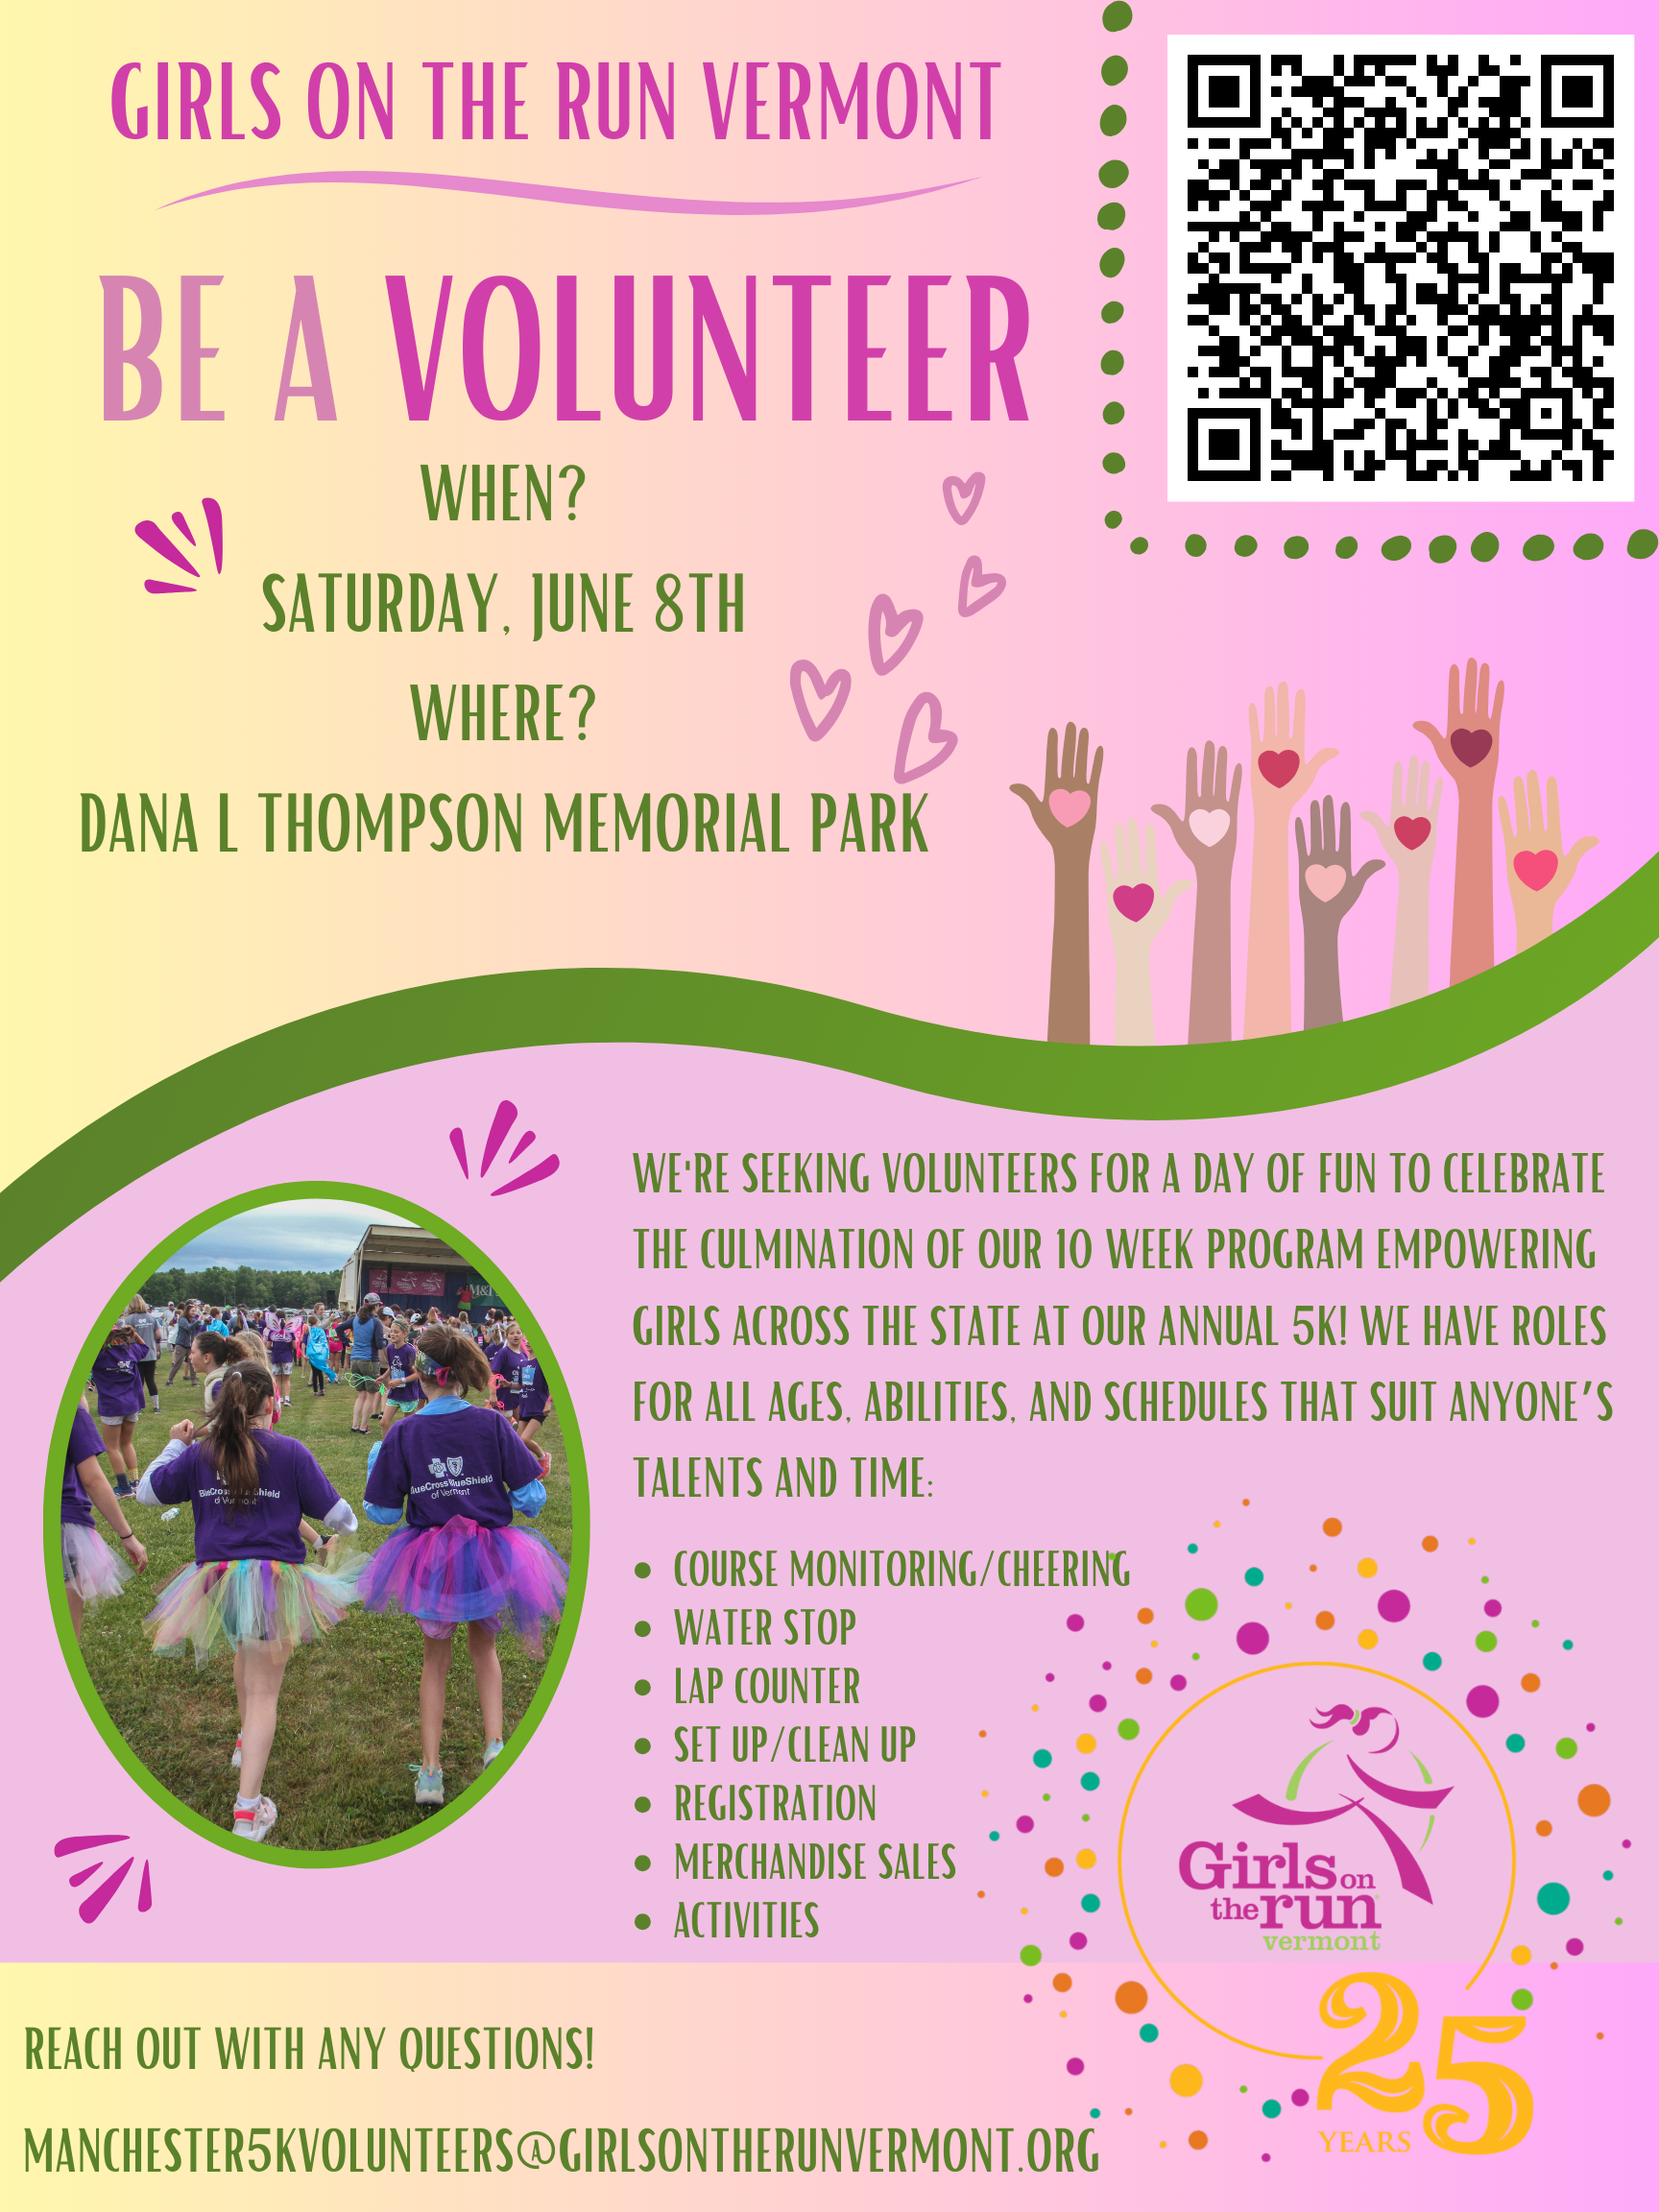 Girls on the run Vermont!

Be a Volunteer!

Saturday, June 8th

Dana J. Thompson Memorial Park

Seeking volunteers for a day of fun to celebrate the culmination of our 10 week program empowering girls across the state at our annual 5k!

Roles for all ages, abilities and schedules that suit anyone's talent/time!

-Coure Monitoring/Cheering

-Water Stop

-Lap Counter

-Set up/Clean up

-Registration

-Merchandise Sales

-Activities

Reach out to manchester5kvolunteers@girlsontherunvermont.org.